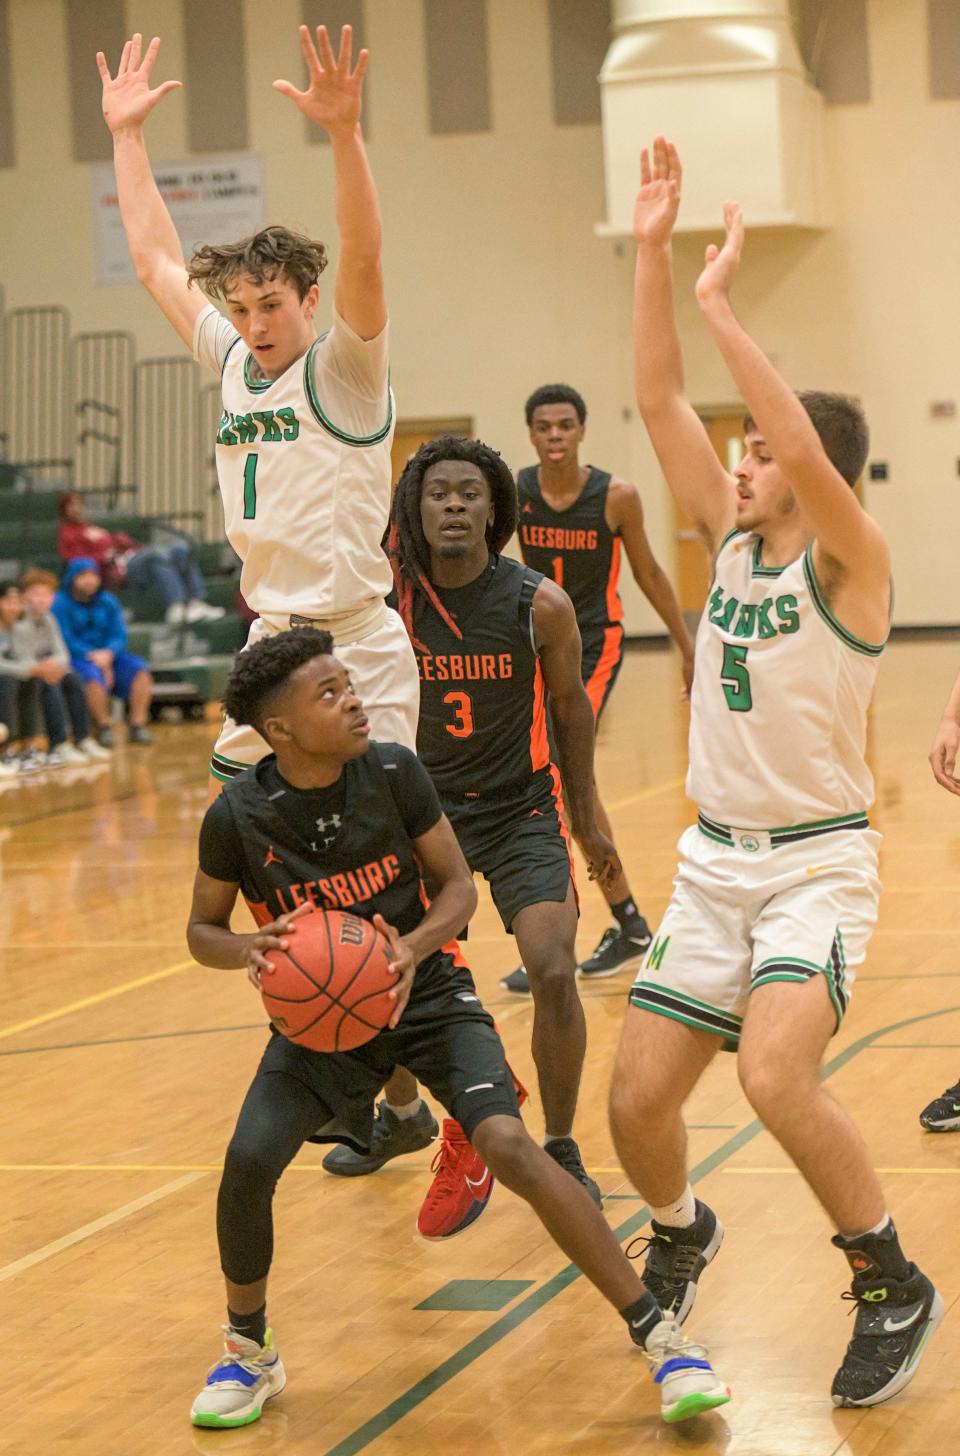 Leesburg freshman Evan James (4) eyes a shot in the lane during Tuesday's game against Lake Minneola. James scored seven points in Leesburg's 85-73 win.